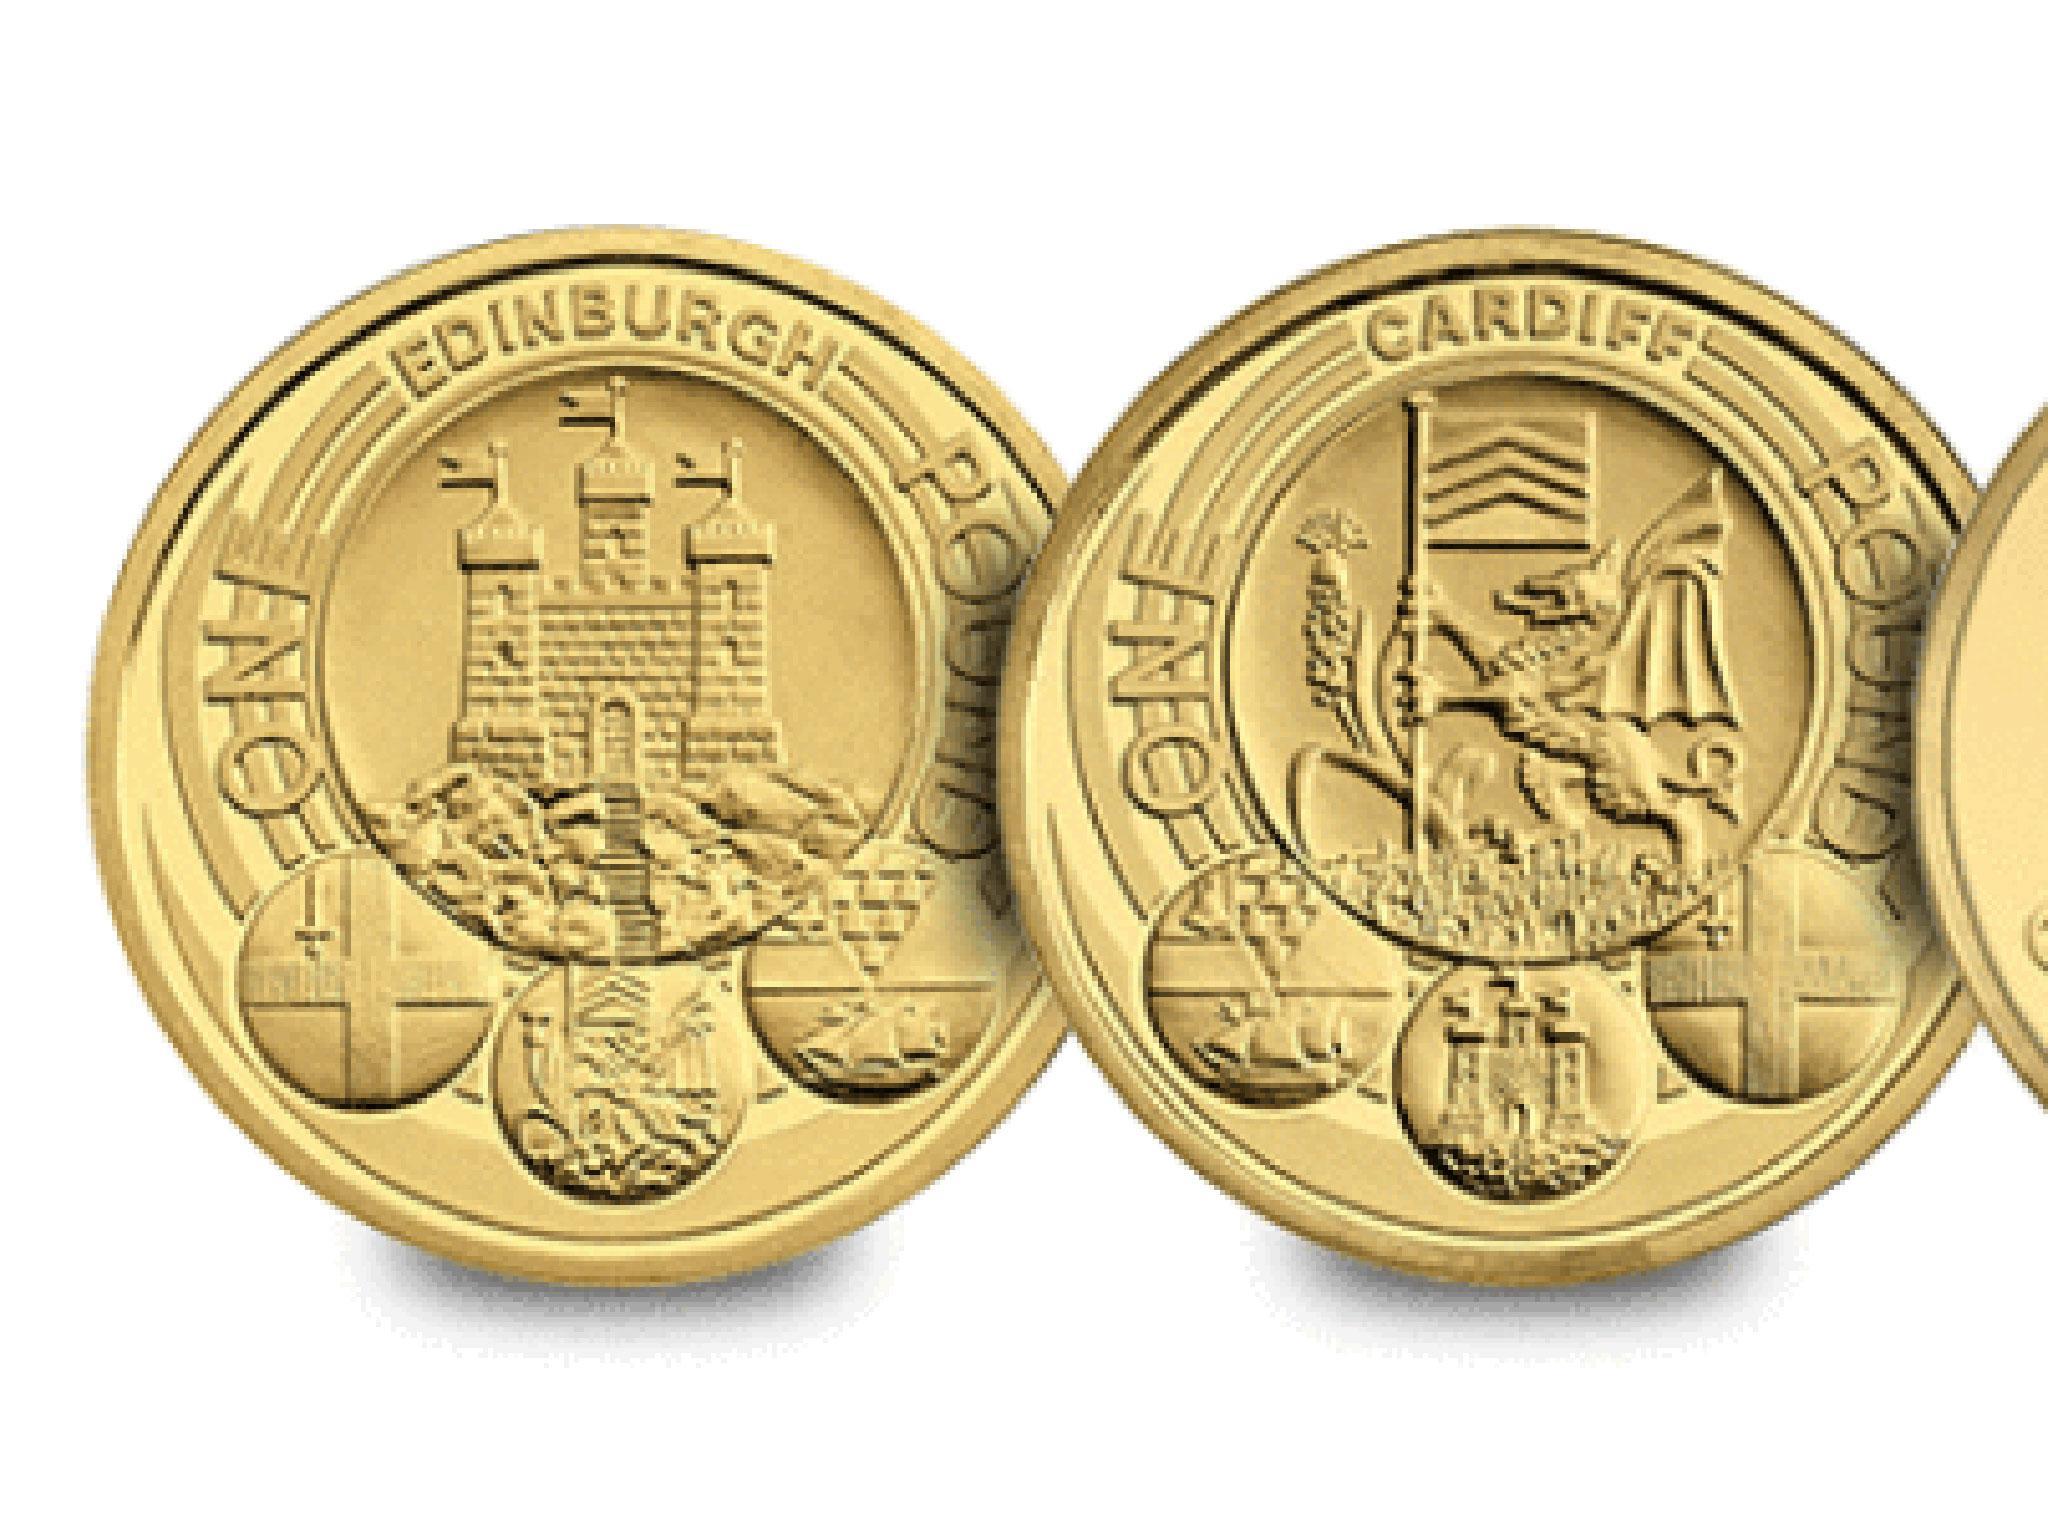 The rarest £1 coin currently in circulation is the Edinburgh £1